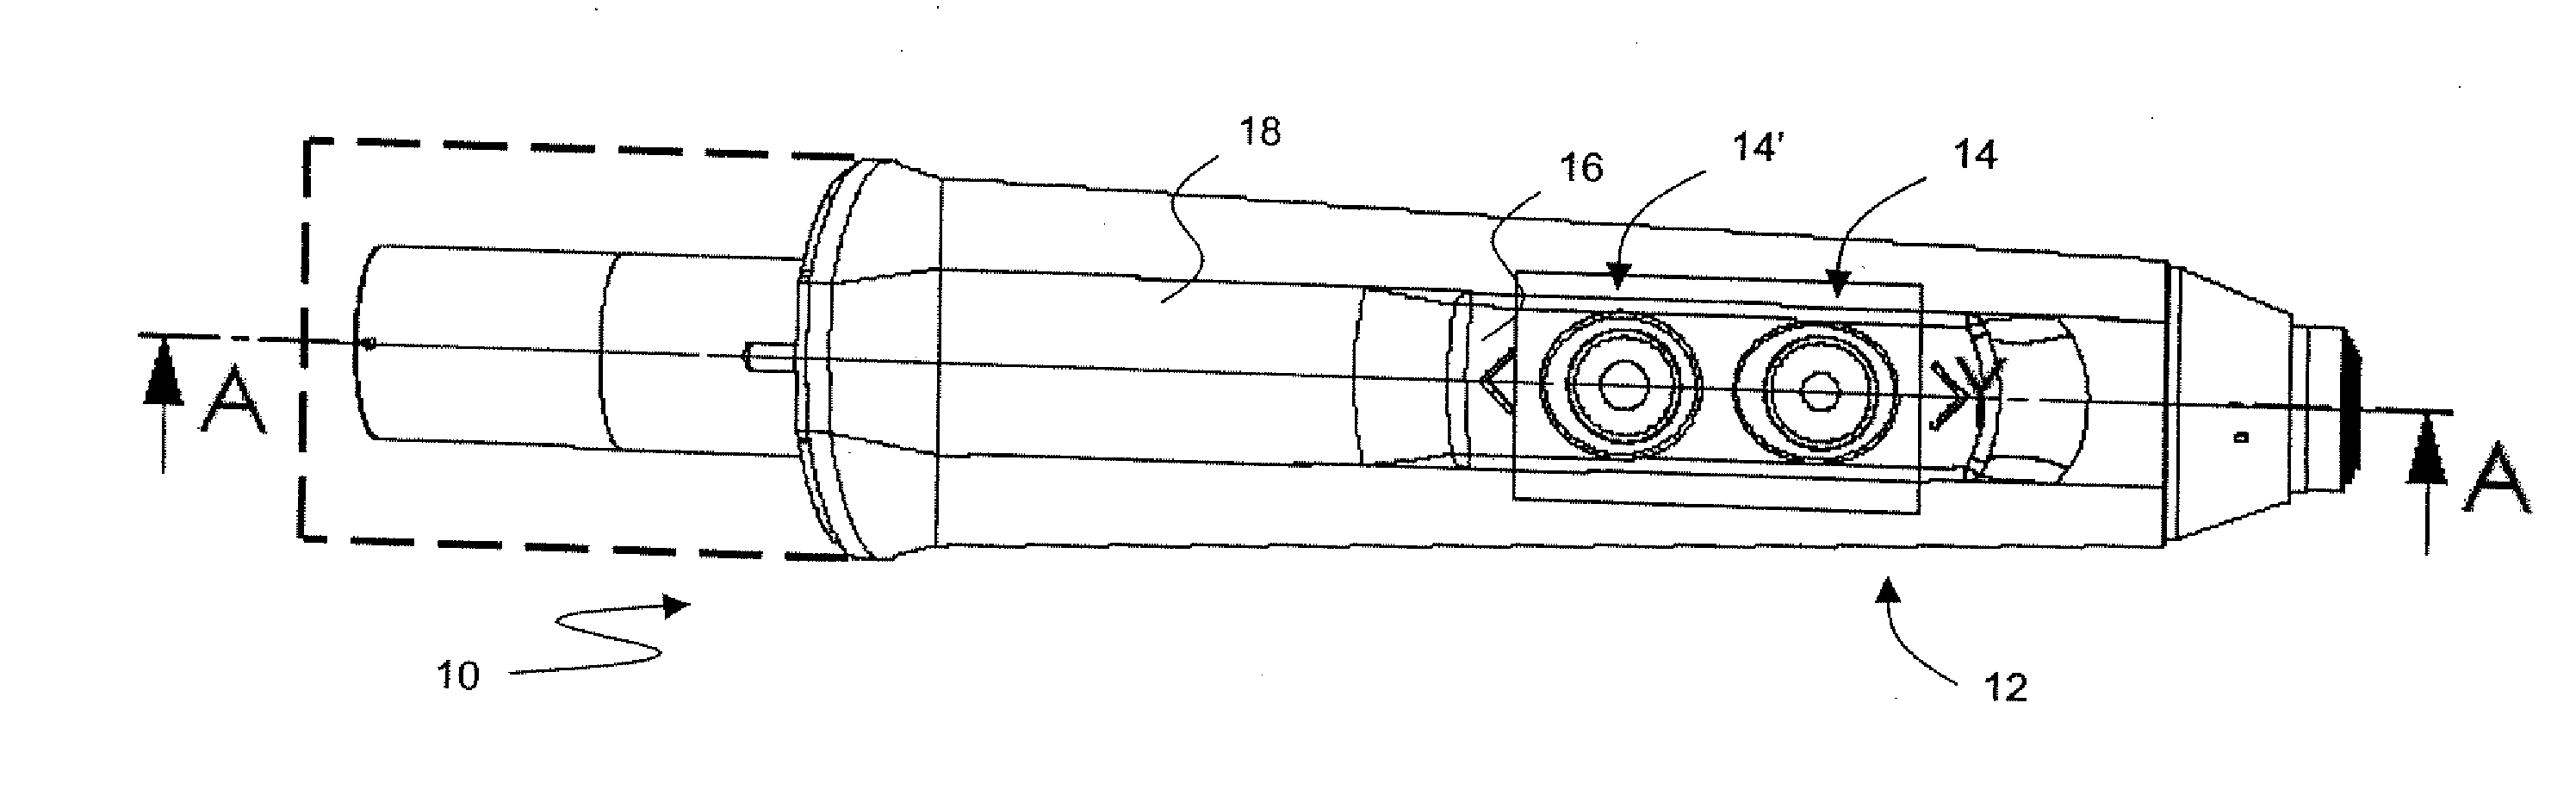 Method for operating a surgical power tool